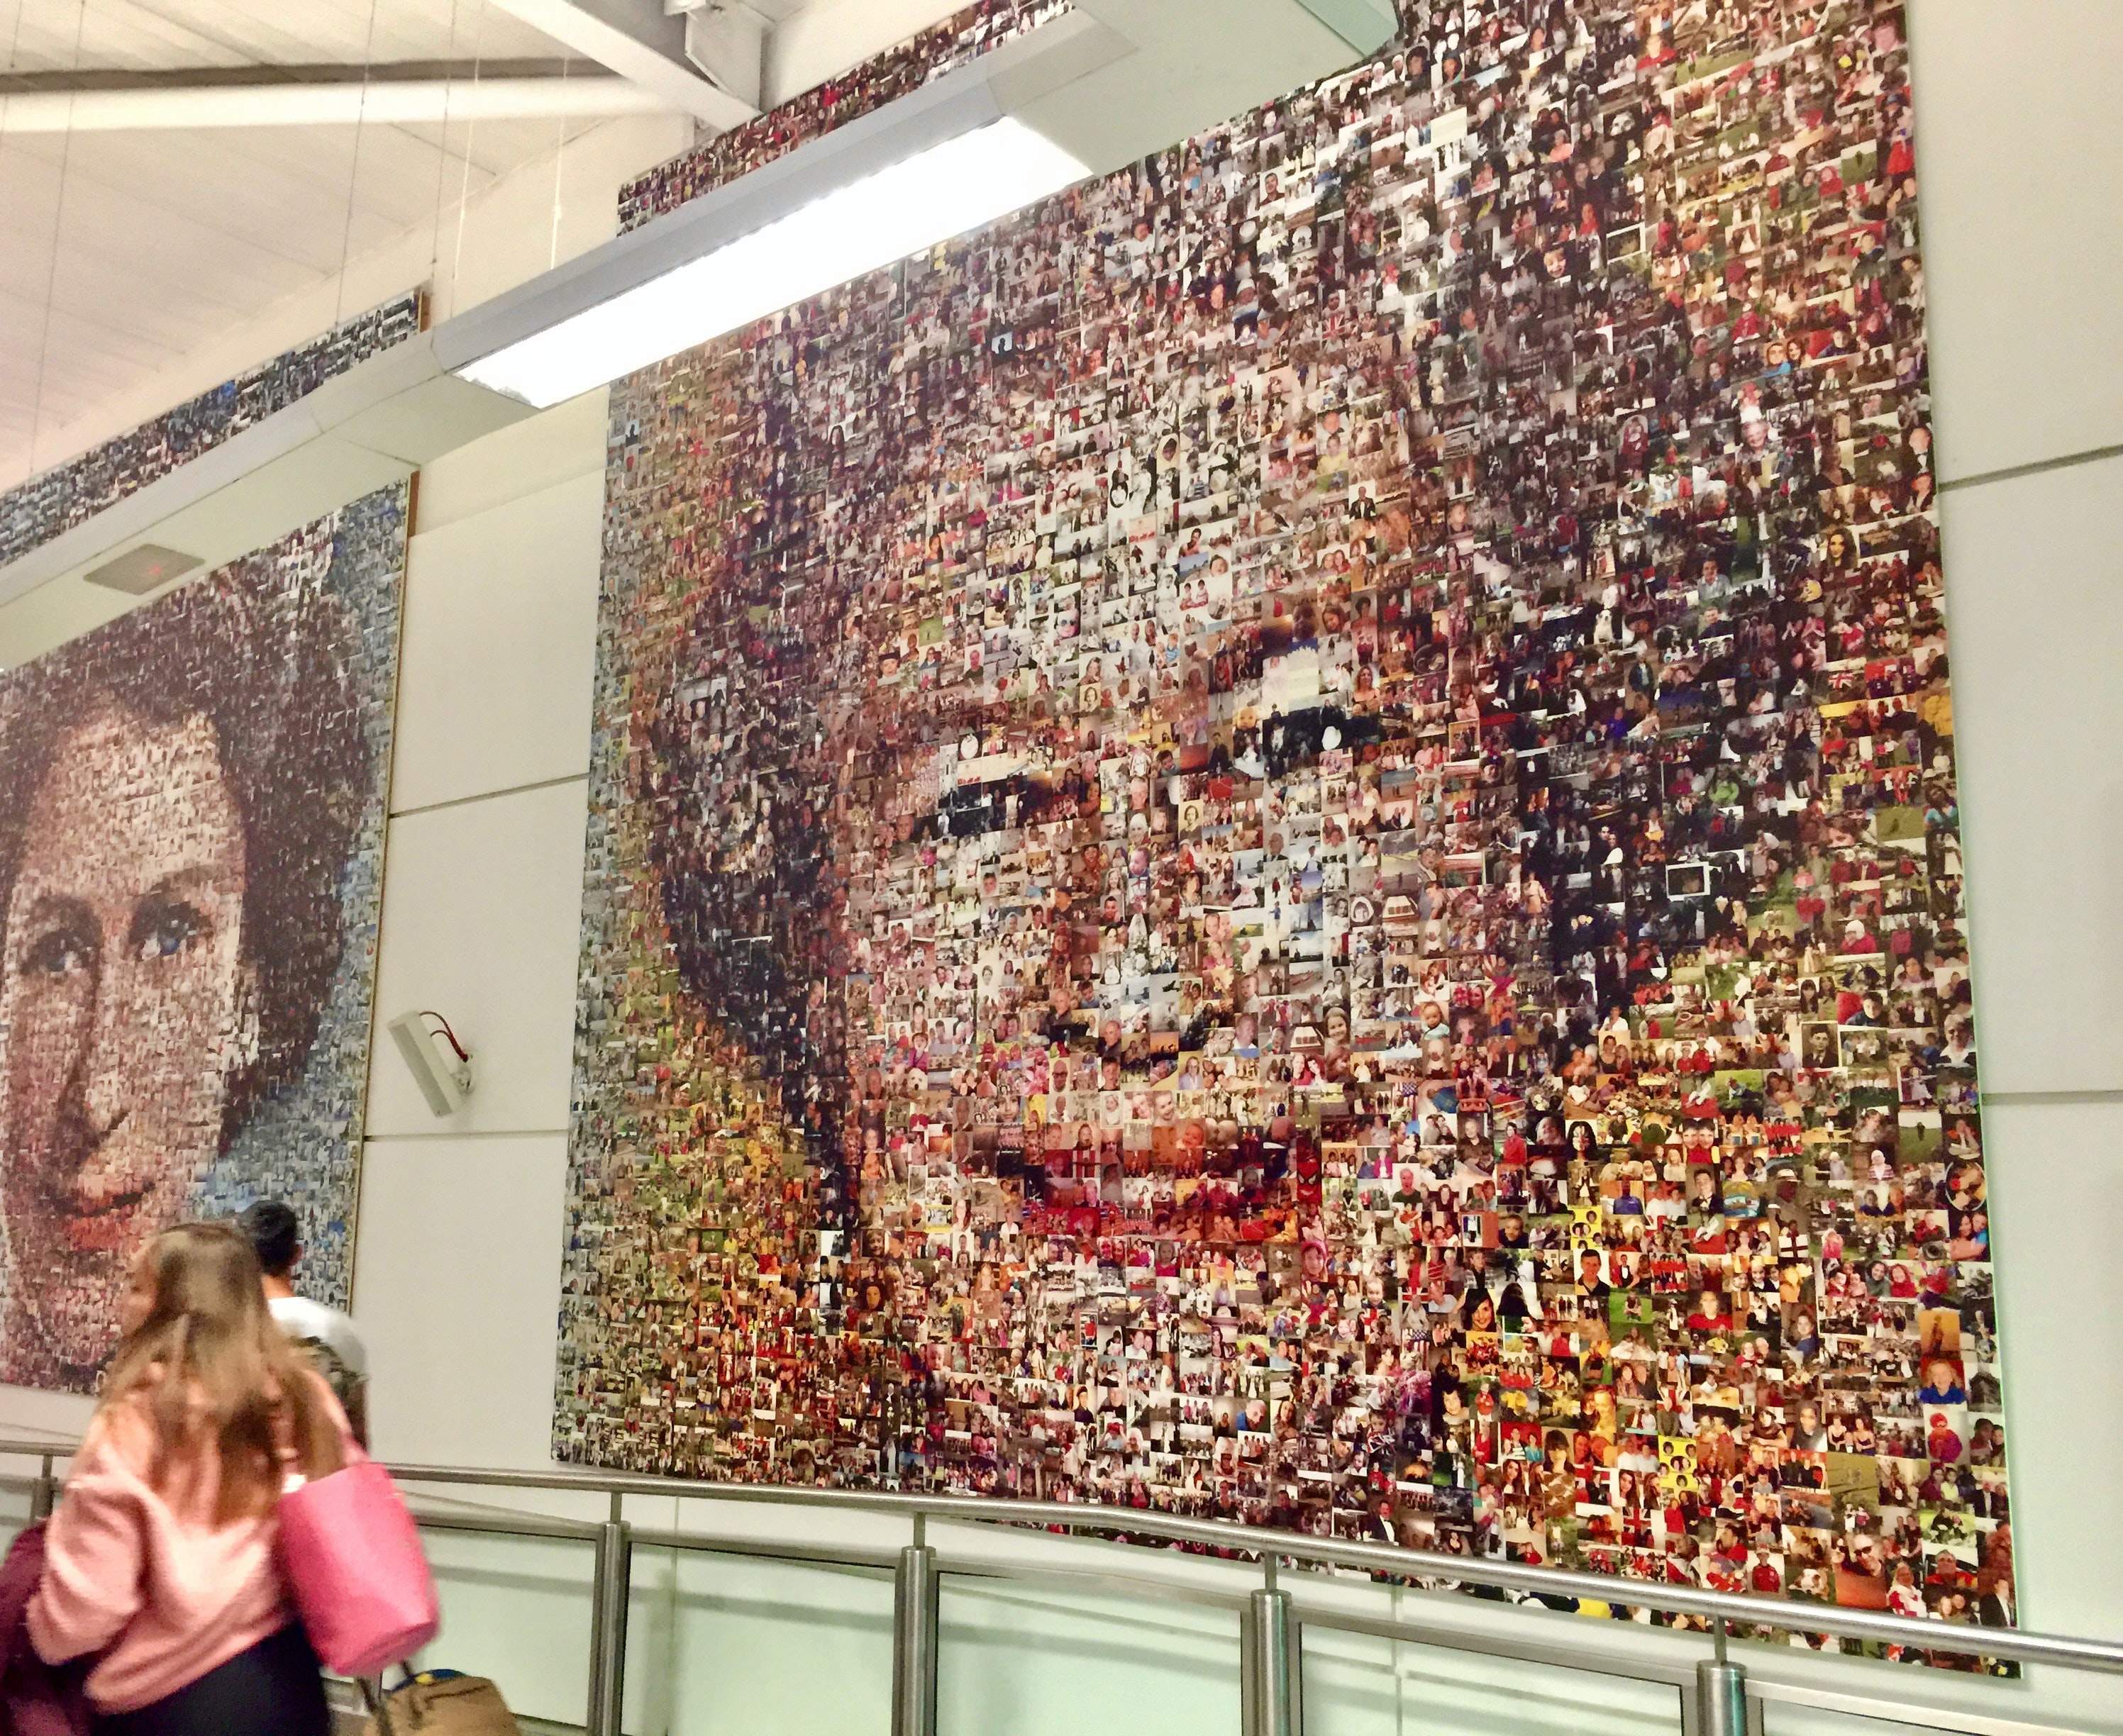 Living a Life of Service : What Can Entrepreneurs Learn from the Queen’s 70 Year Reign?